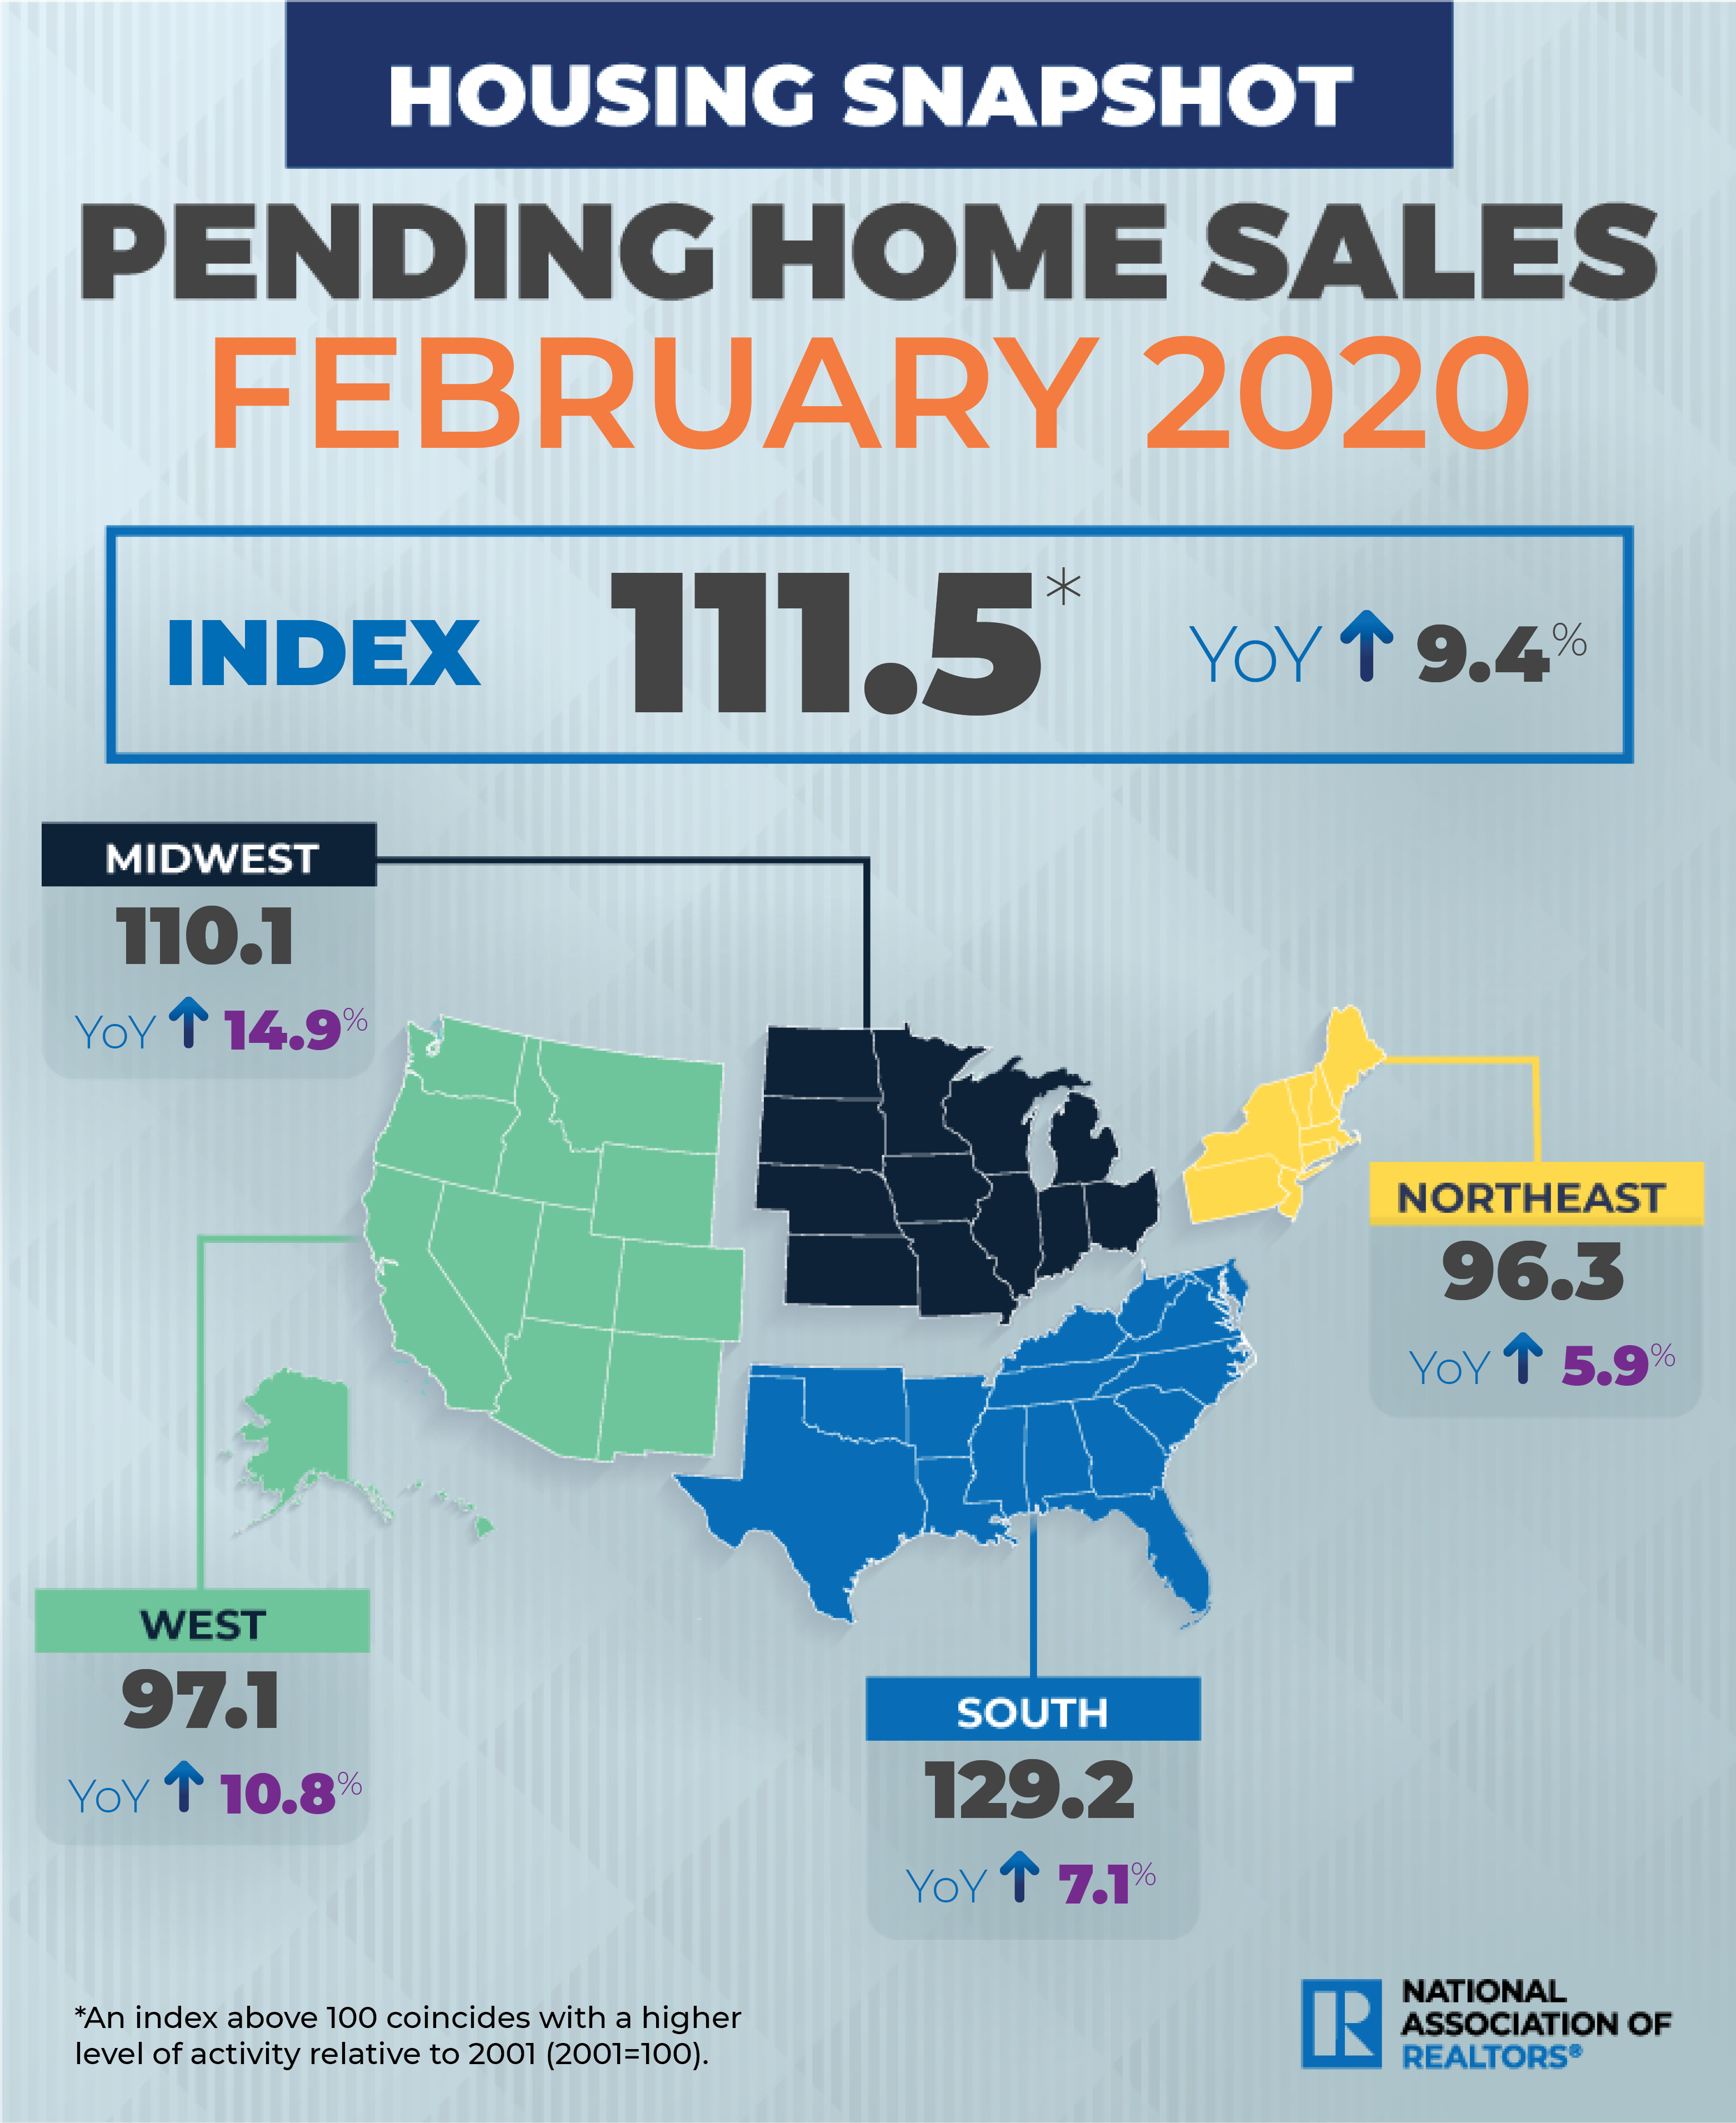 Pending home sales rose in the month of February, climbing for the second consecutive month, according to data from the National Association of Realtors